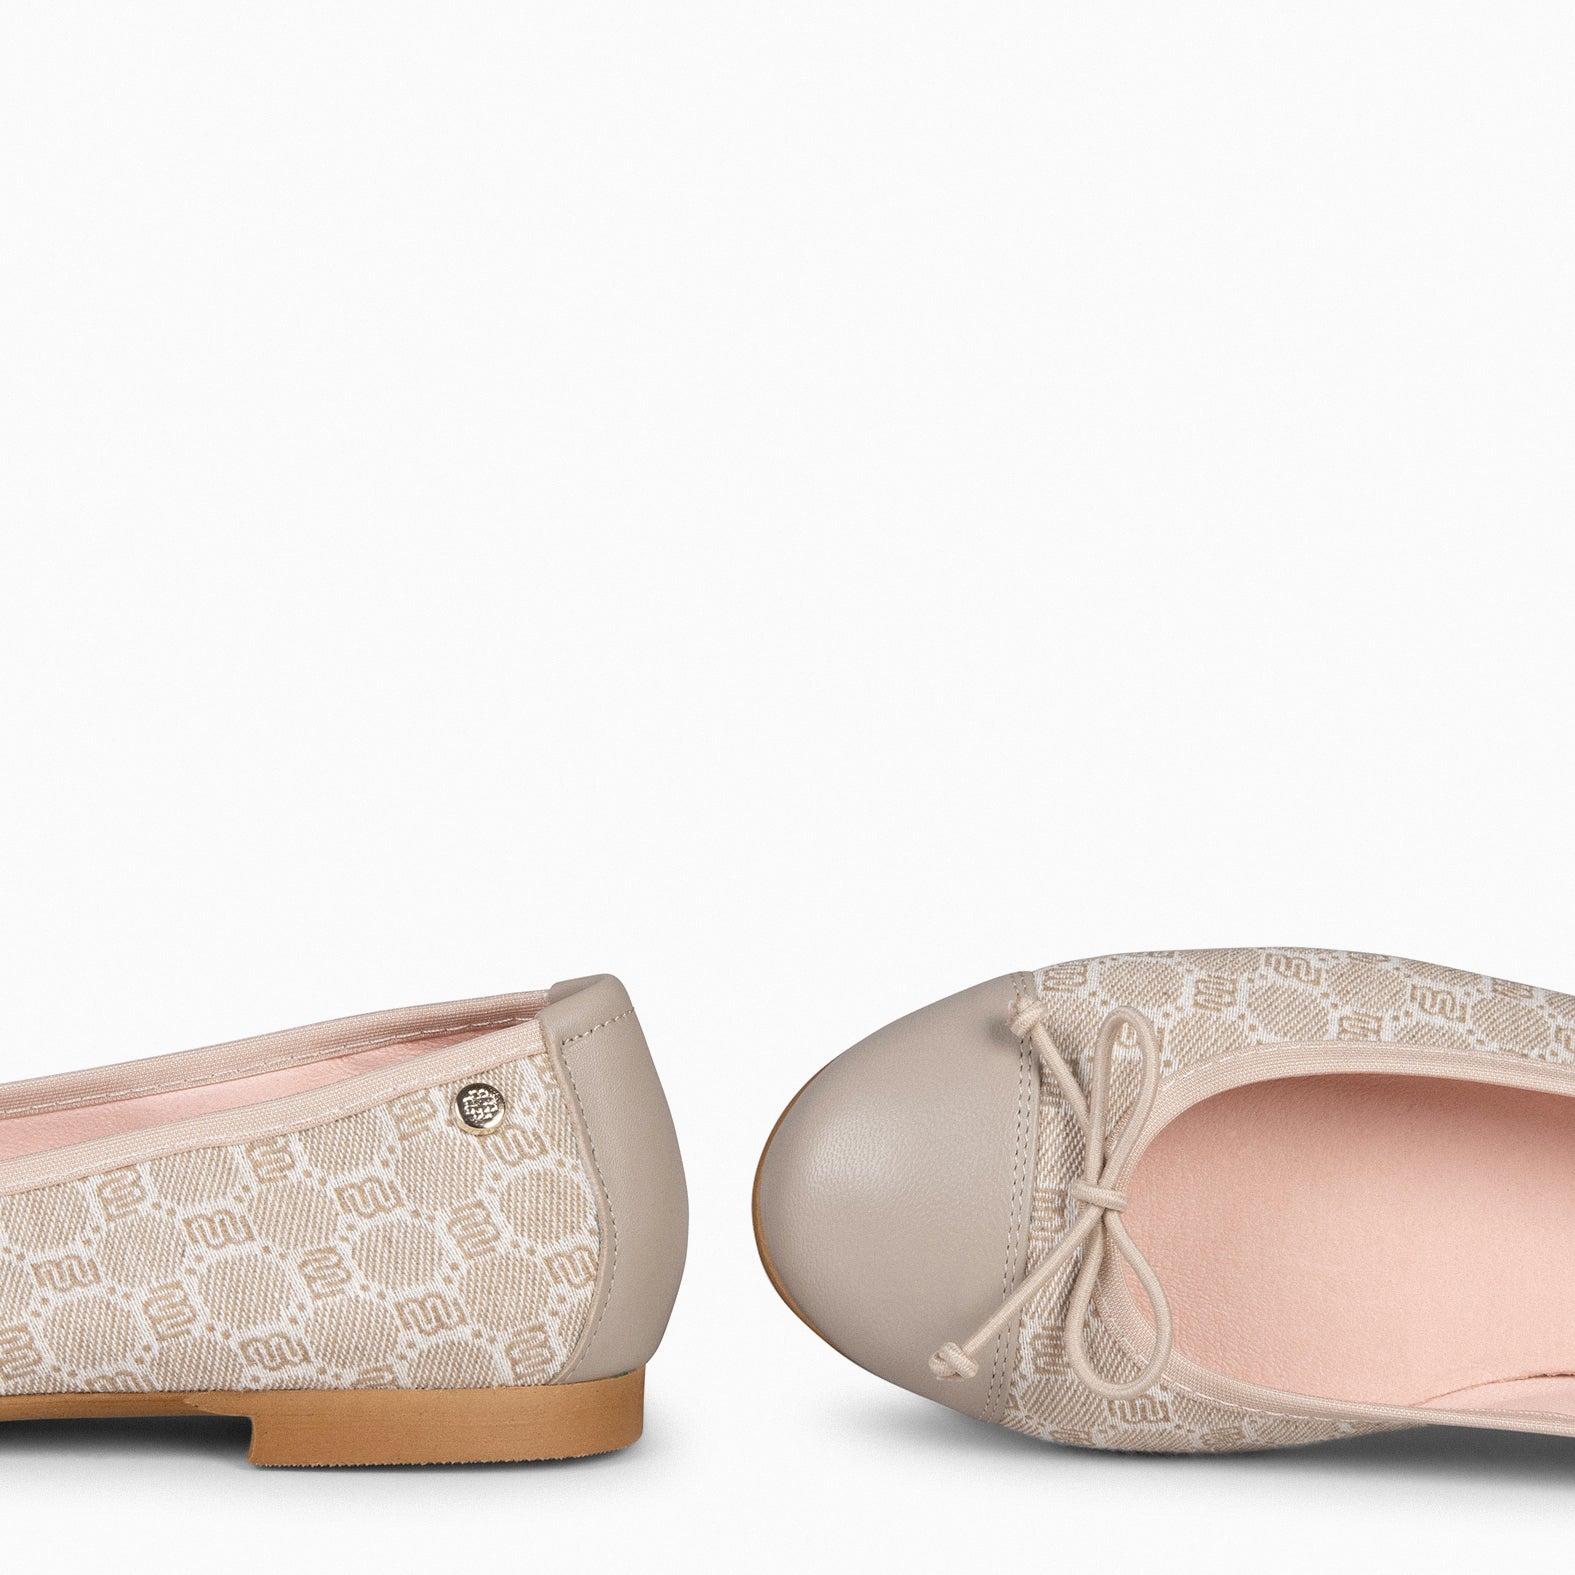 VICTORIA – TAUPE BALLERINA WITH LACE